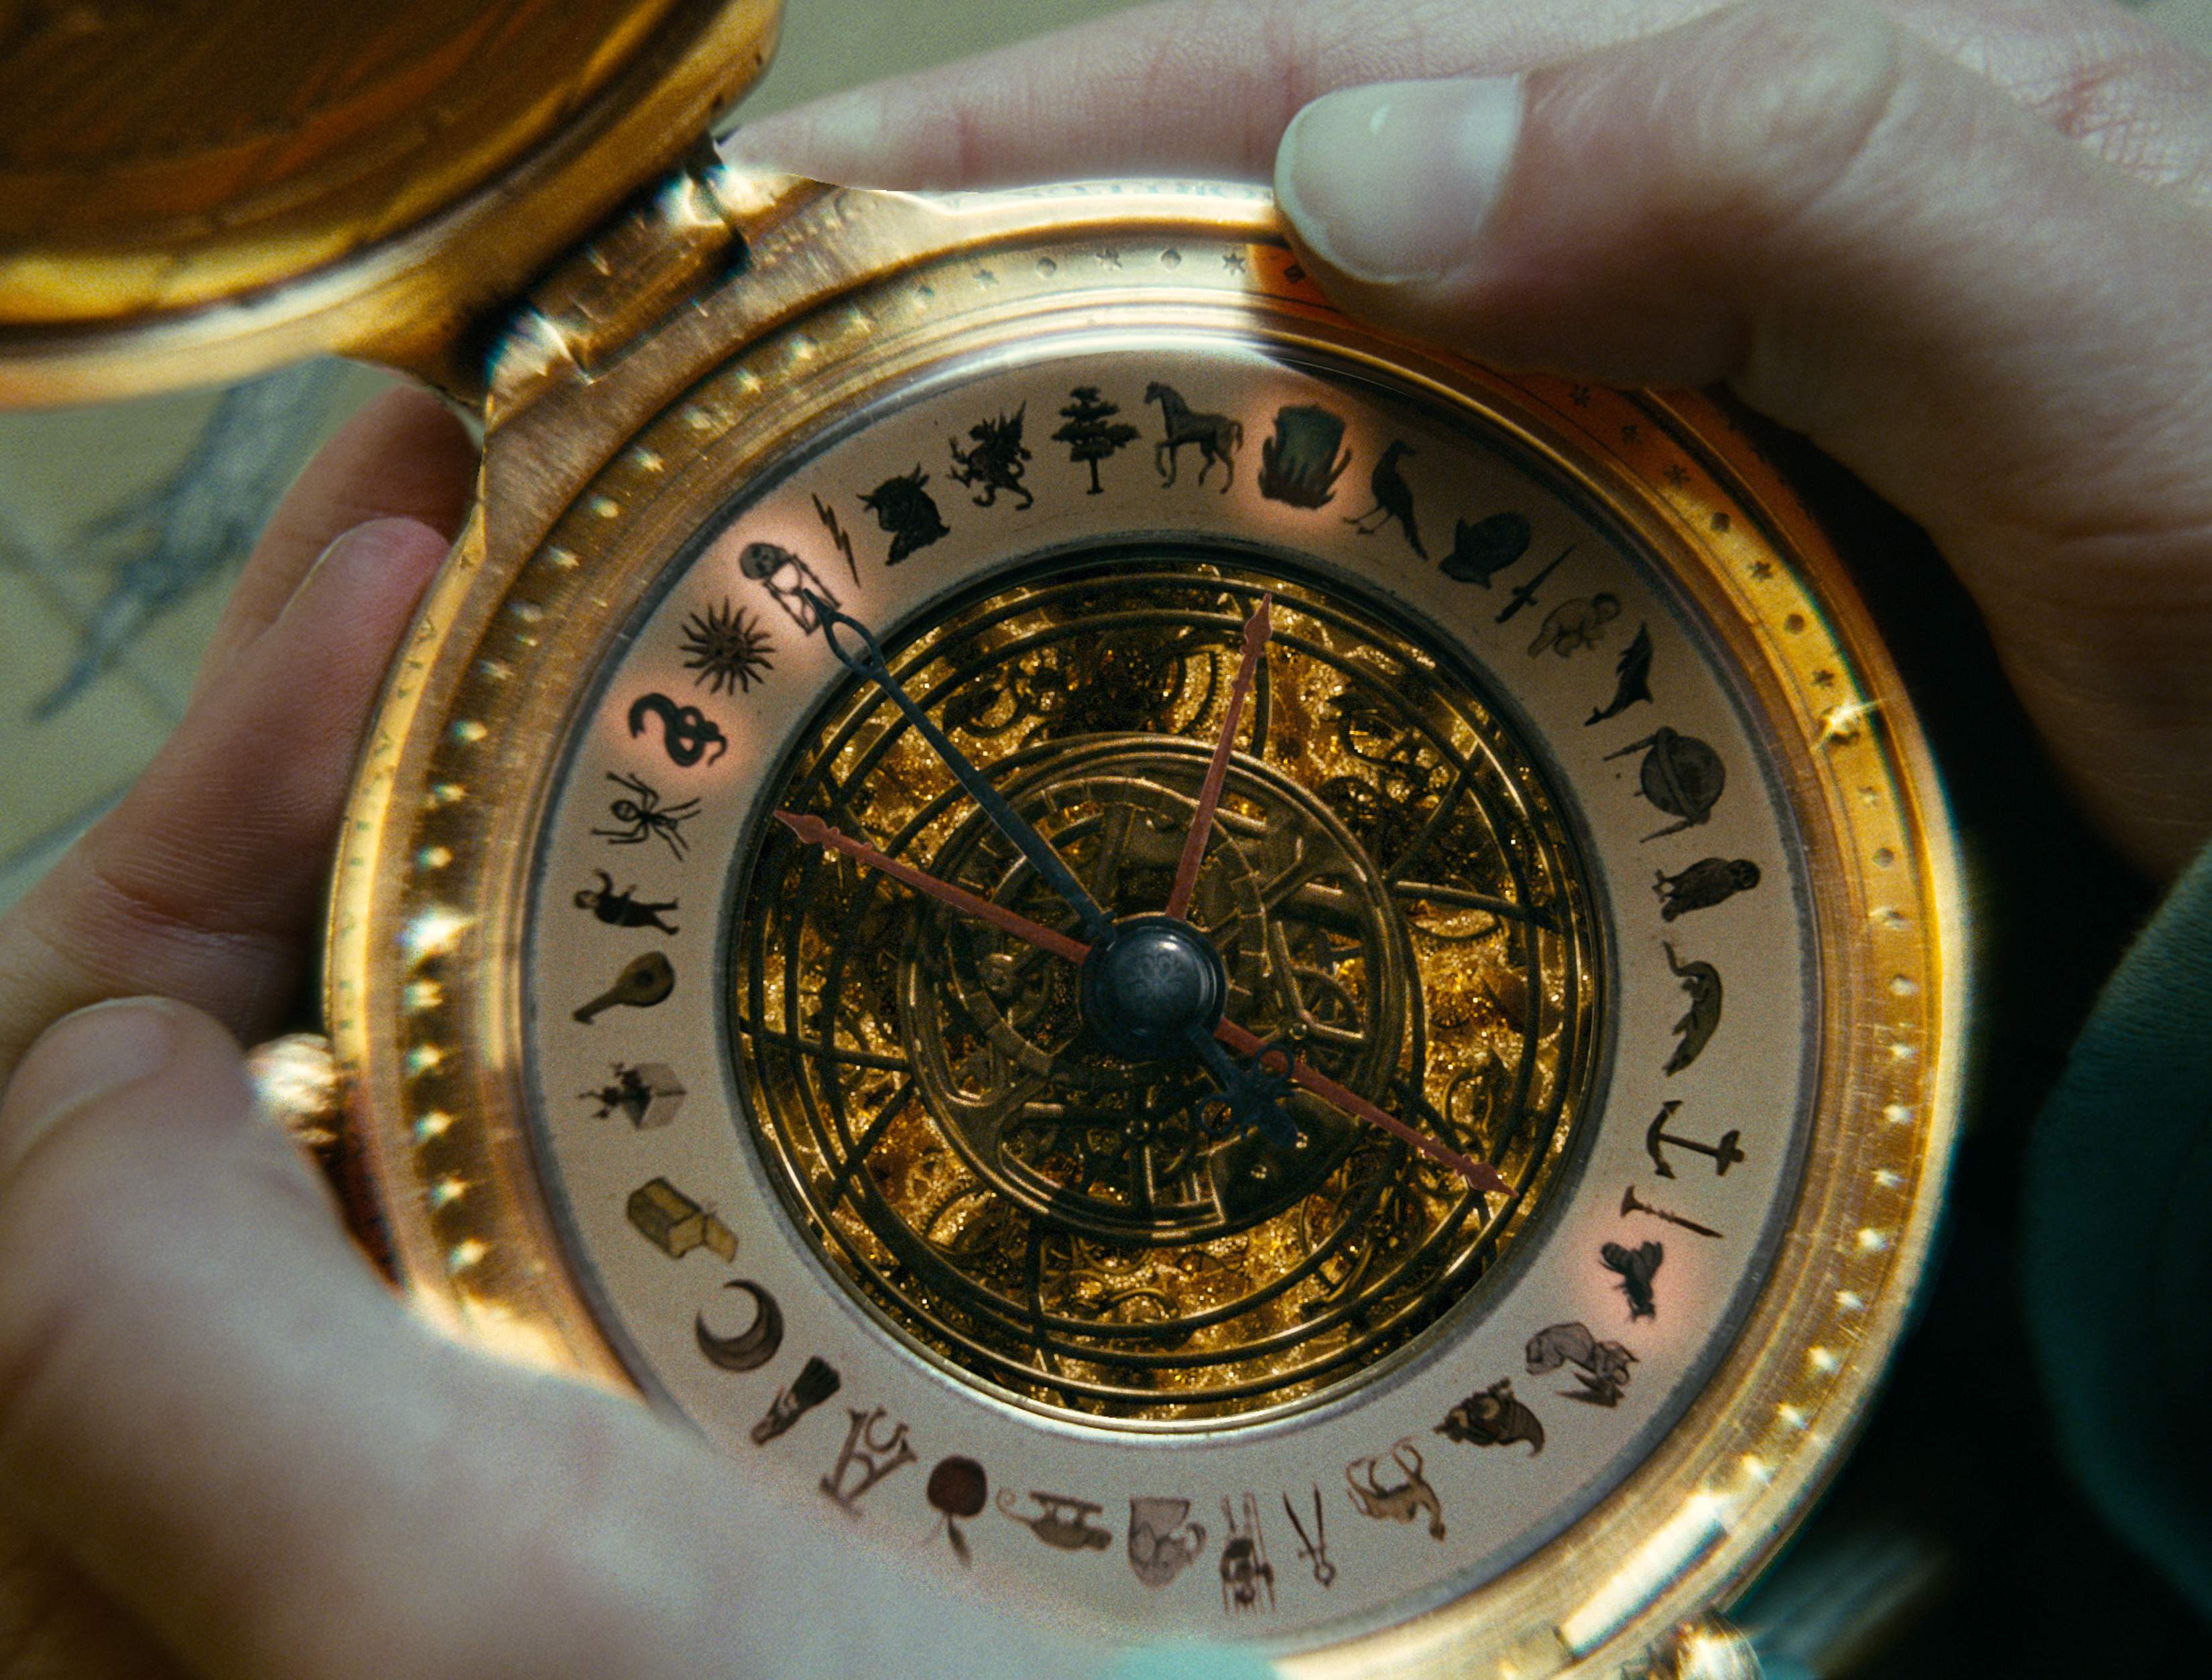 The Alethiometer in action from New Line Home Entertainment's fantasy adventure The Golden Compass.